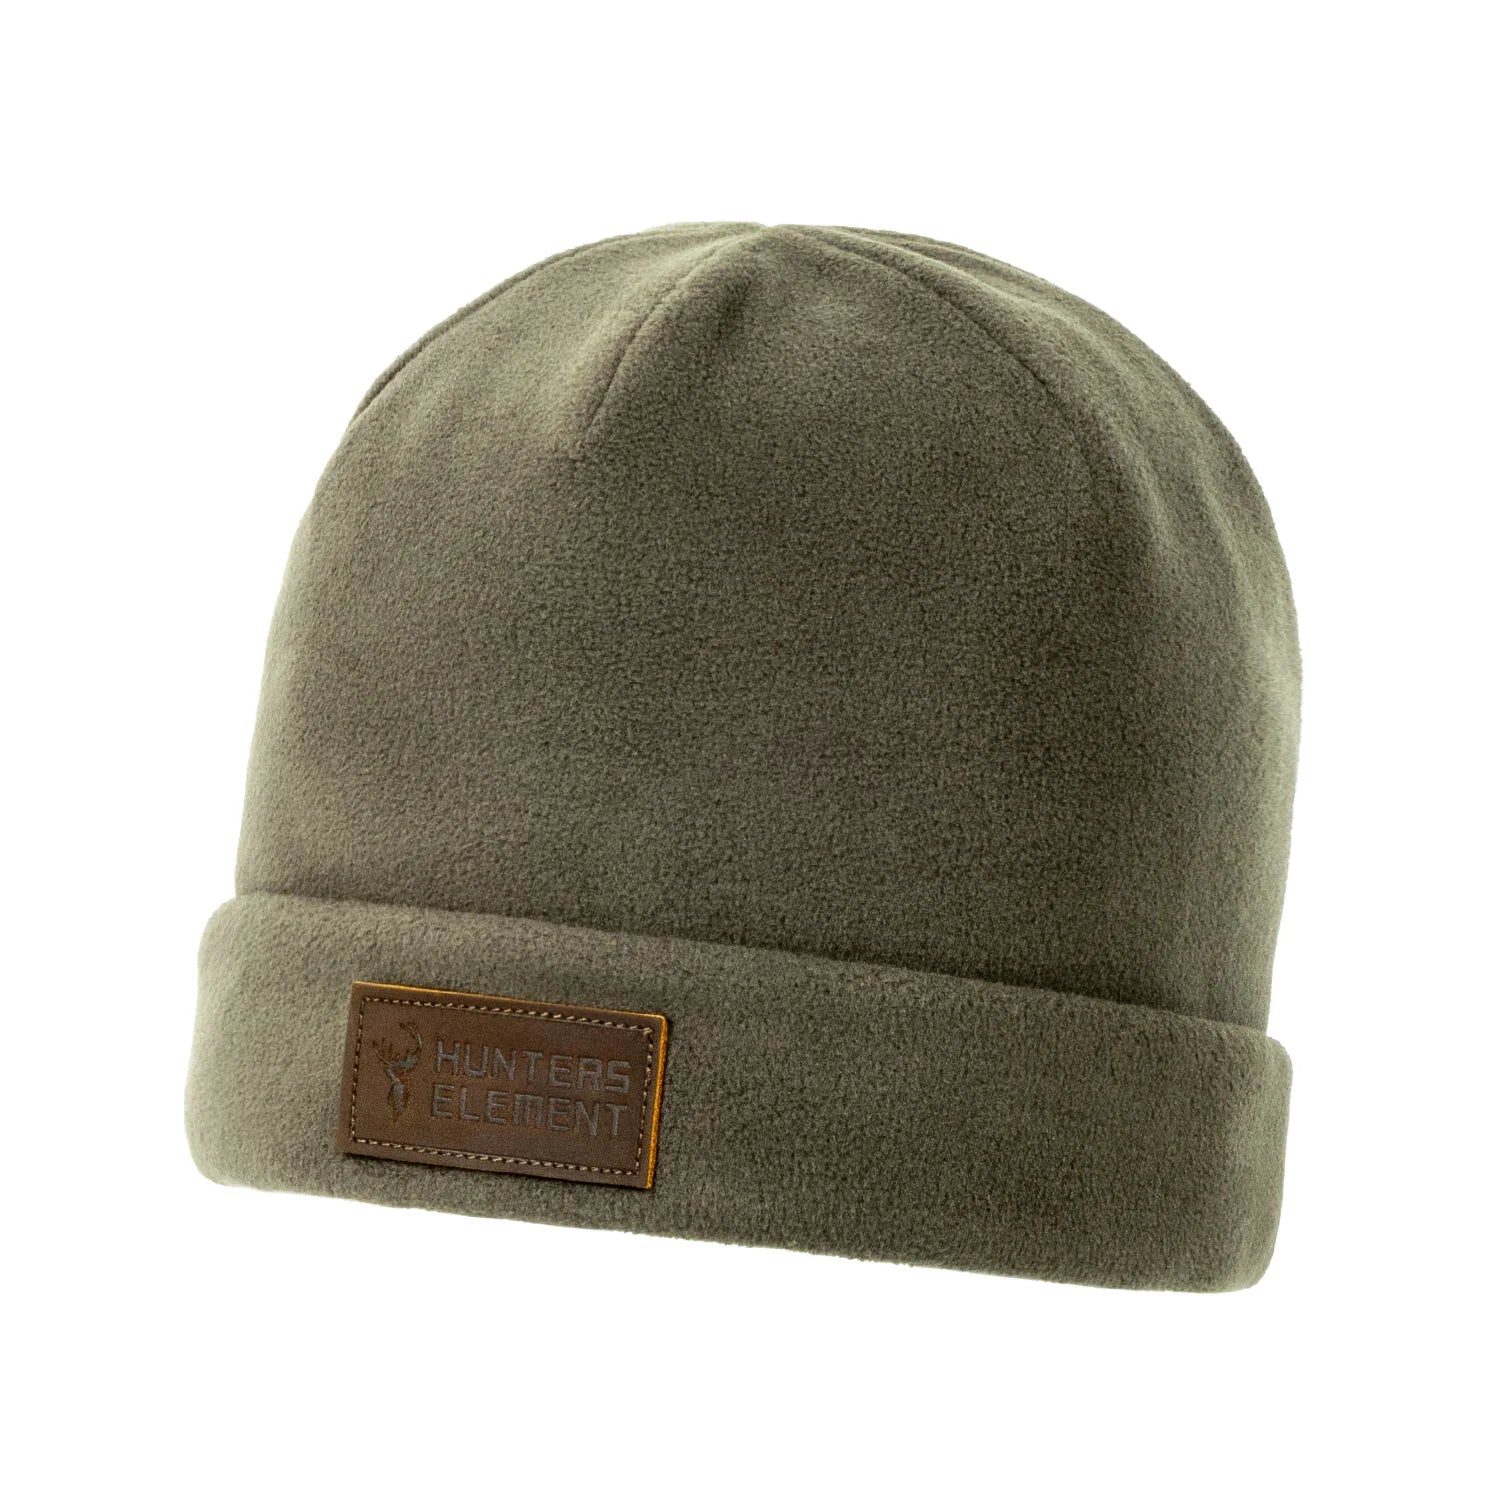 Hunters Element Terrain Beanie - FOREST GREEN - Mansfield Hunting & Fishing - Products to prepare for Corona Virus